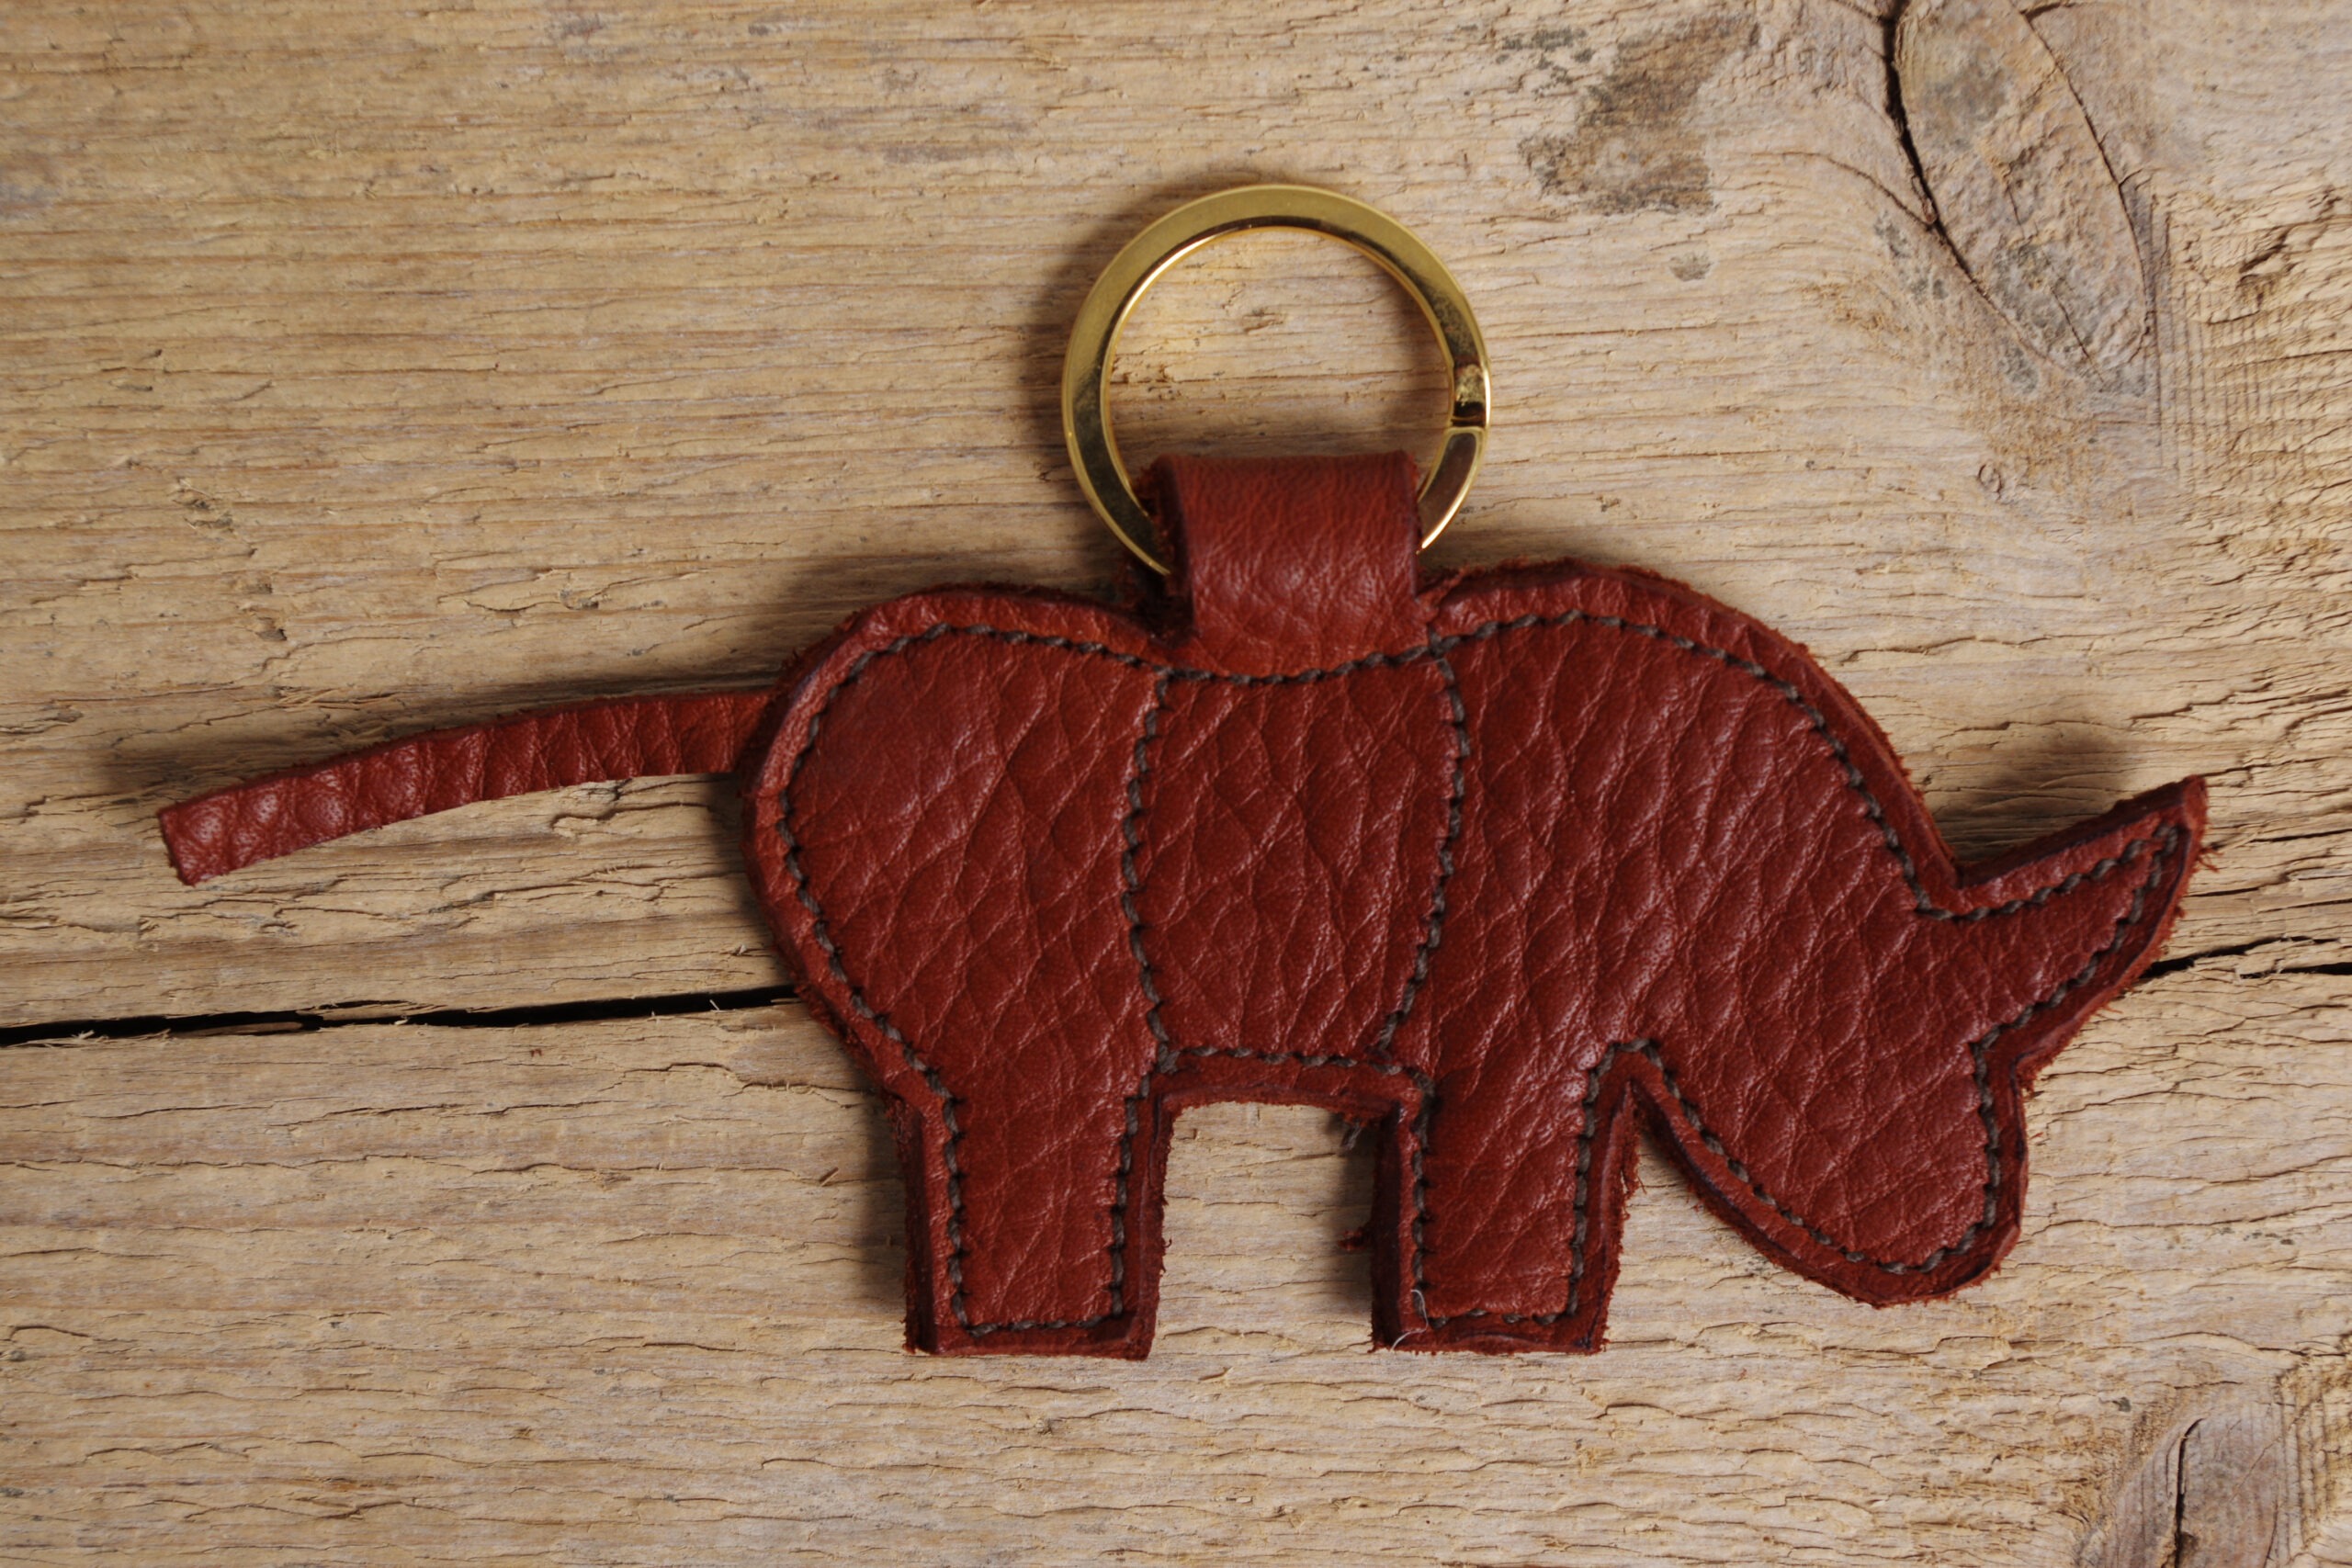 Reclaimed leather keychain with rhino embellishment